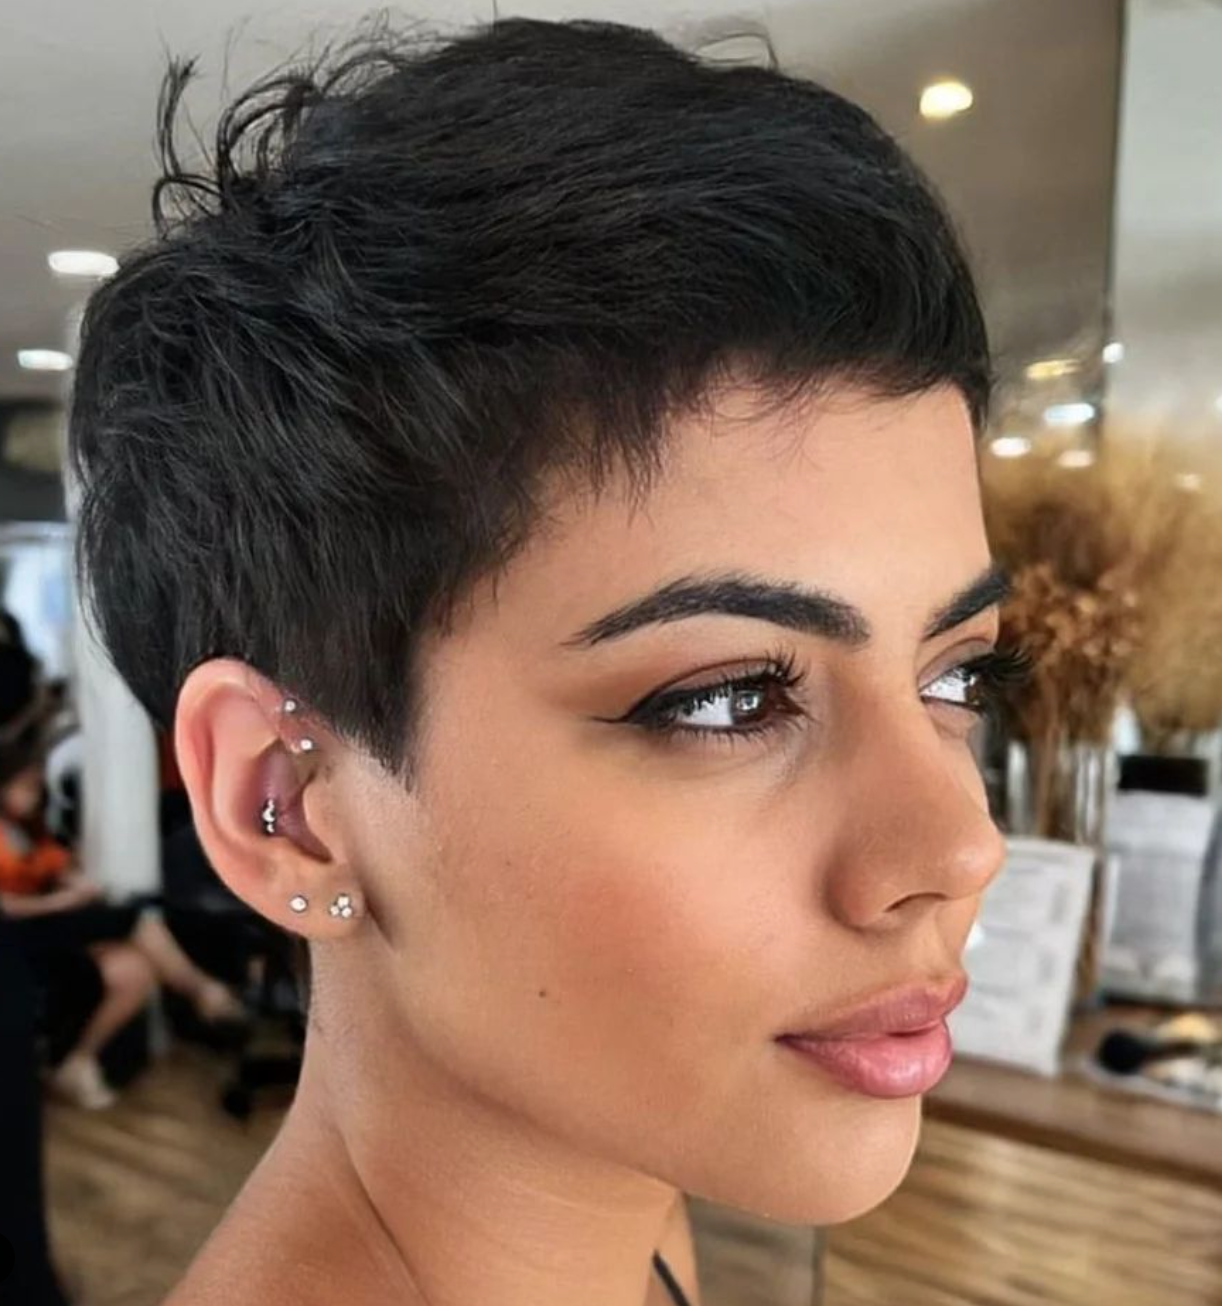 A woman with a black pixie haircut gazes off to the side.